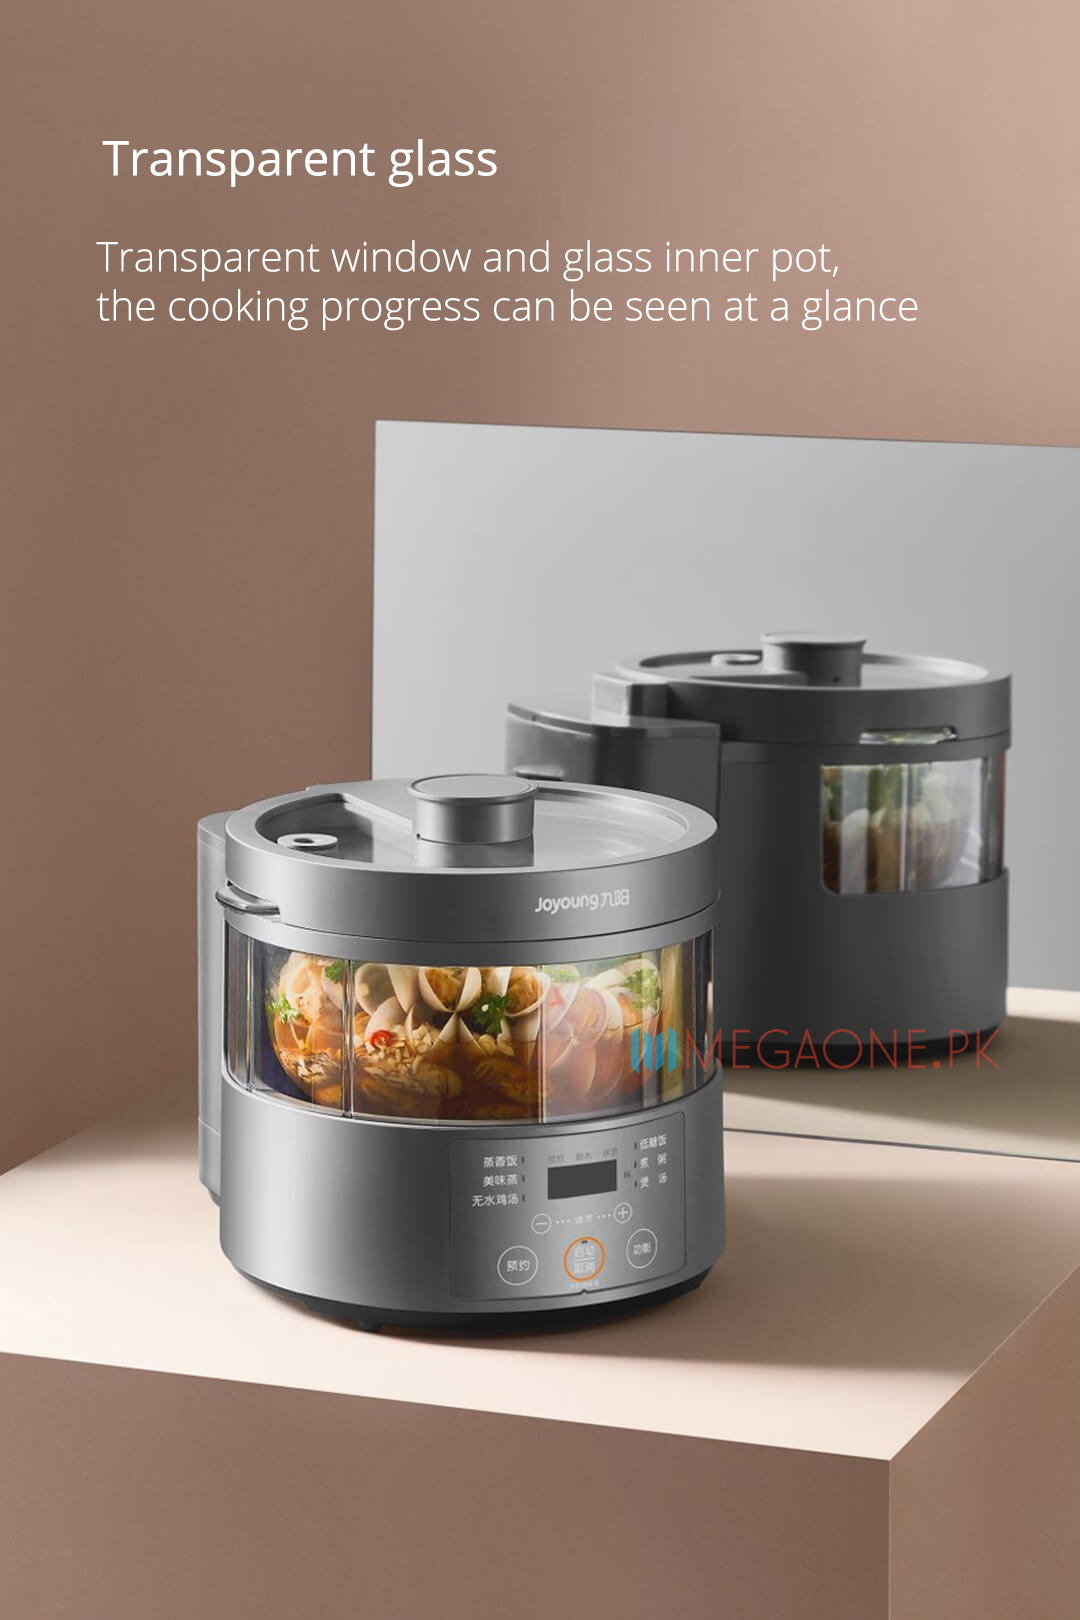 Transparent window and glass inner pot, the cooking progress can be seen at a glance